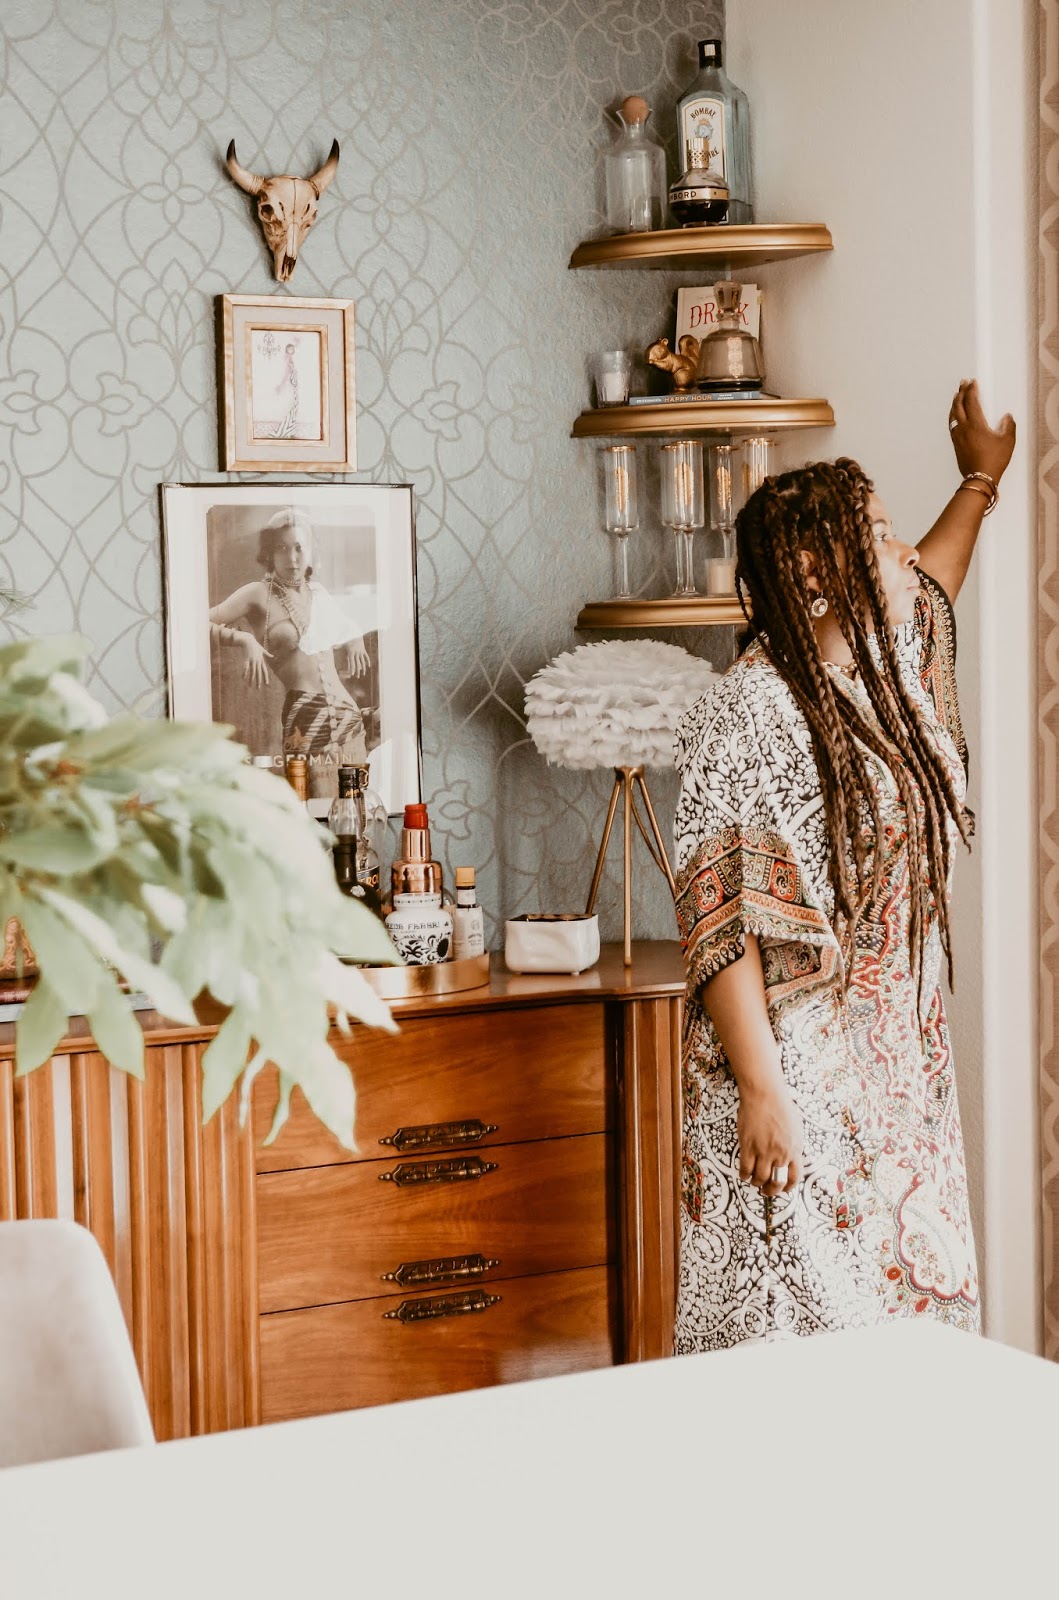 kimono-style-day-dresses-best-options-for-summer2020-staycation-for-sheltering-in-at-home